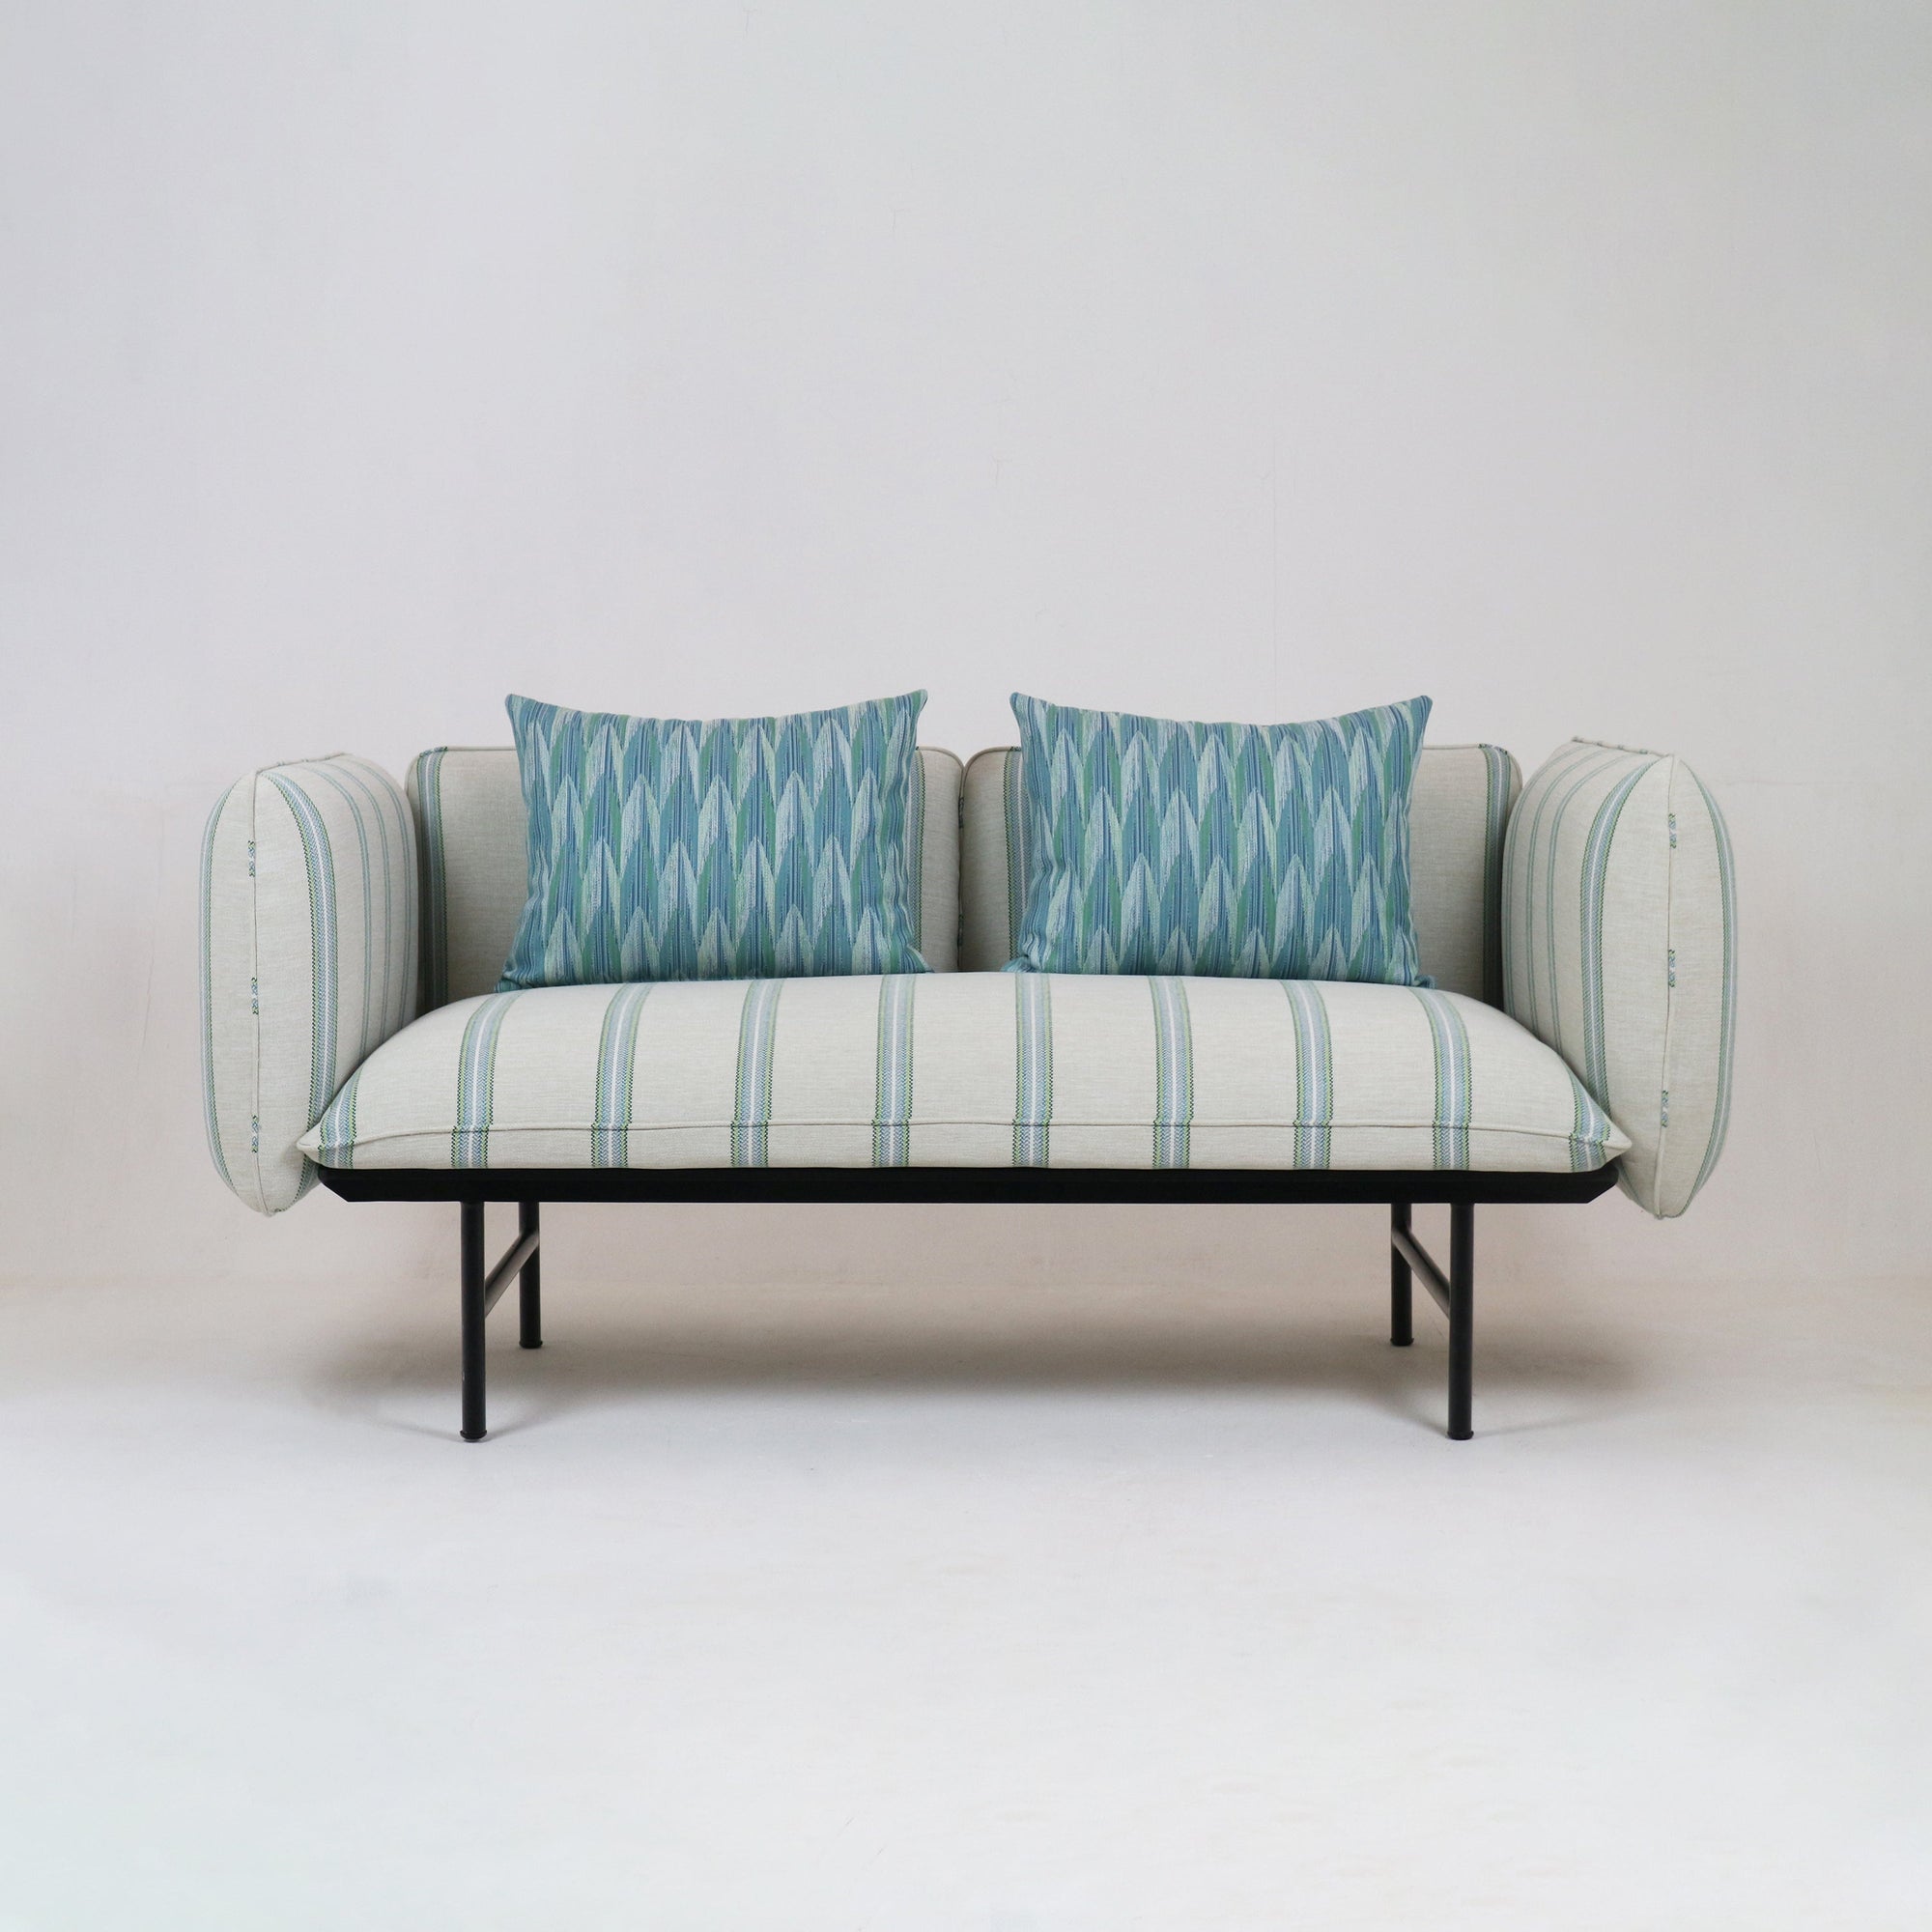 Outdoor Sectional Sofa with Schumacher Fabric - INTERIORTONIC